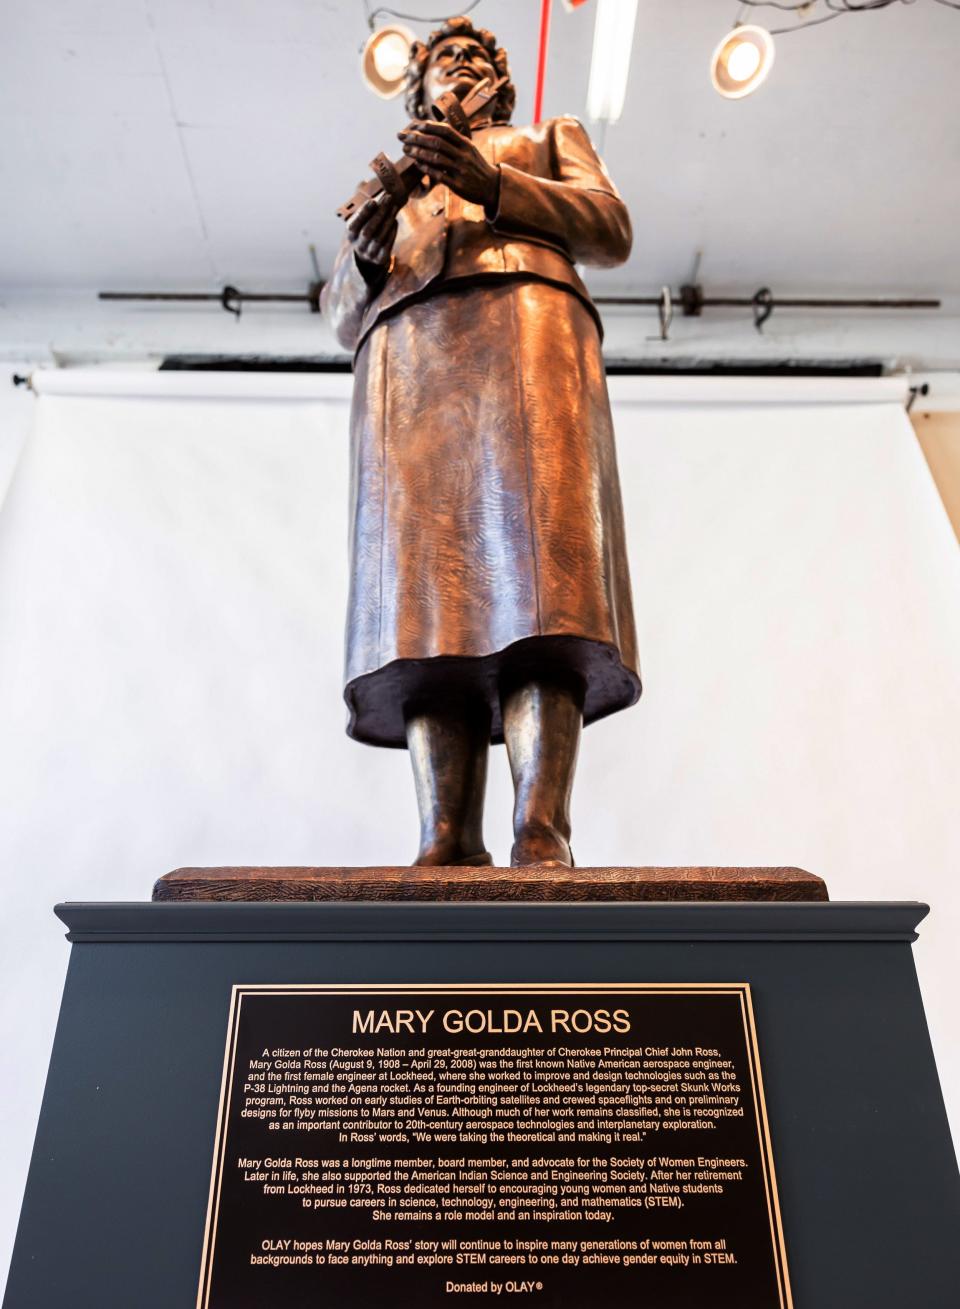 Trailblazing Cherokee aerospace engineer Mary Golda Ross, the first-known Native American woman engineer, is memorialized in a new sculpture on view at the First Americans Museum in Oklahoma City. Photo provided by Erin Silber Photography